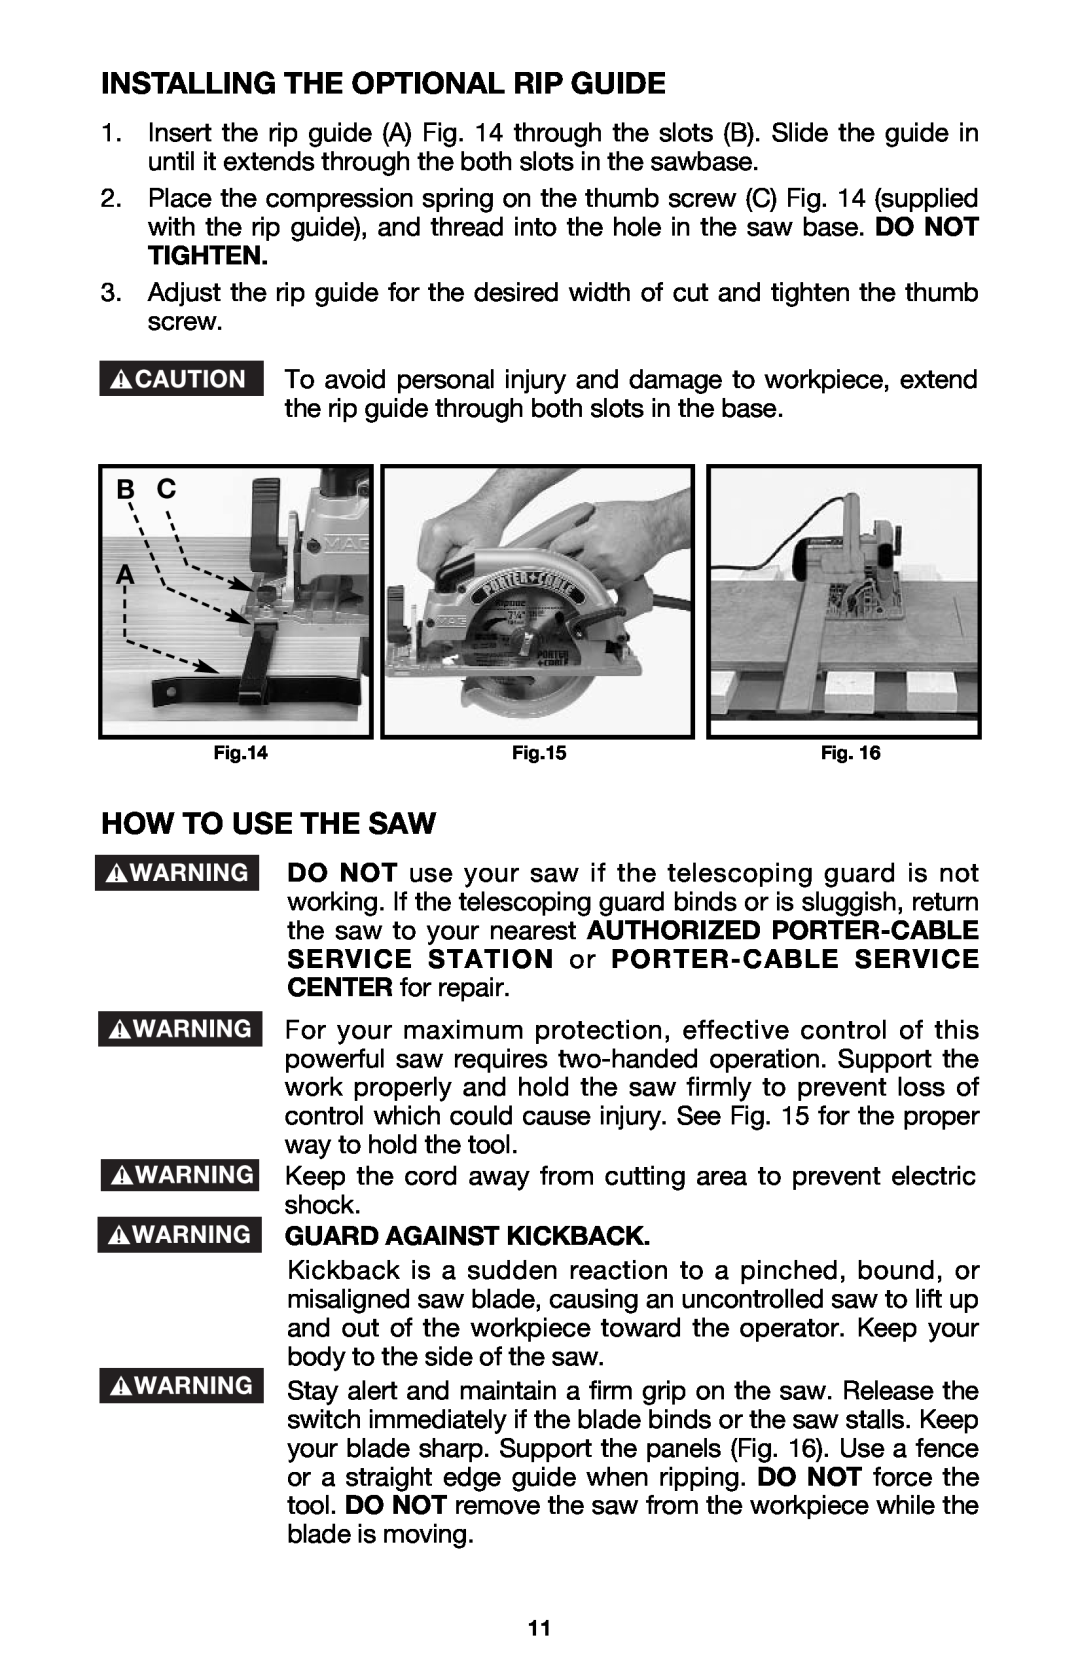 Porter-Cable 424MAG, 423MAG Installing The Optional Rip Guide, How To Use The Saw, Tighten, Bc A, Guard Against Kickback 